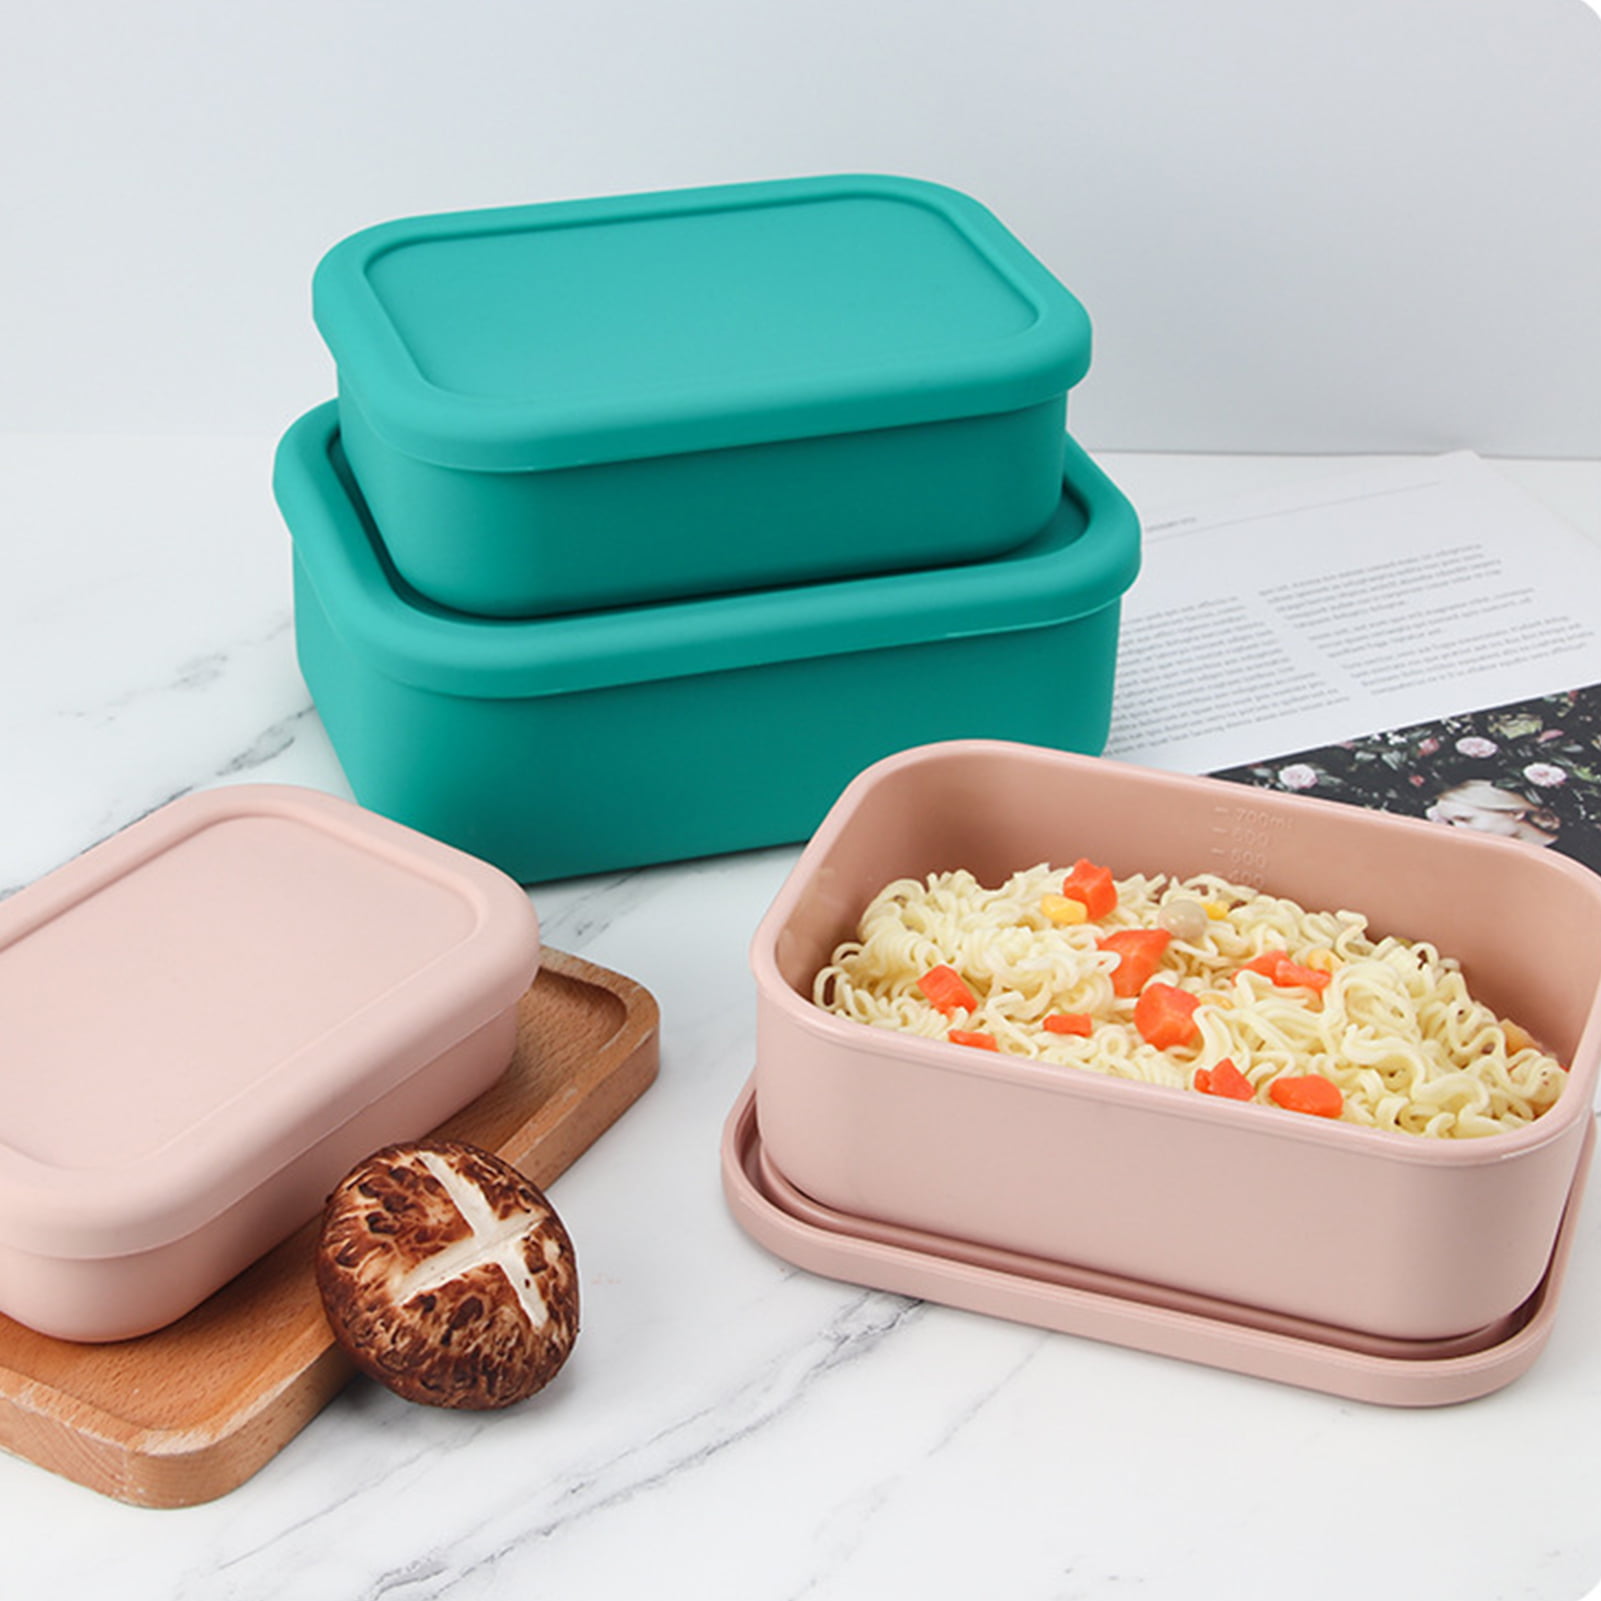 Silicone Bento Box for Kids, Toddlers and Adults - Made from Platinum LFGB  German Silicone - Microwa…See more Silicone Bento Box for Kids, Toddlers